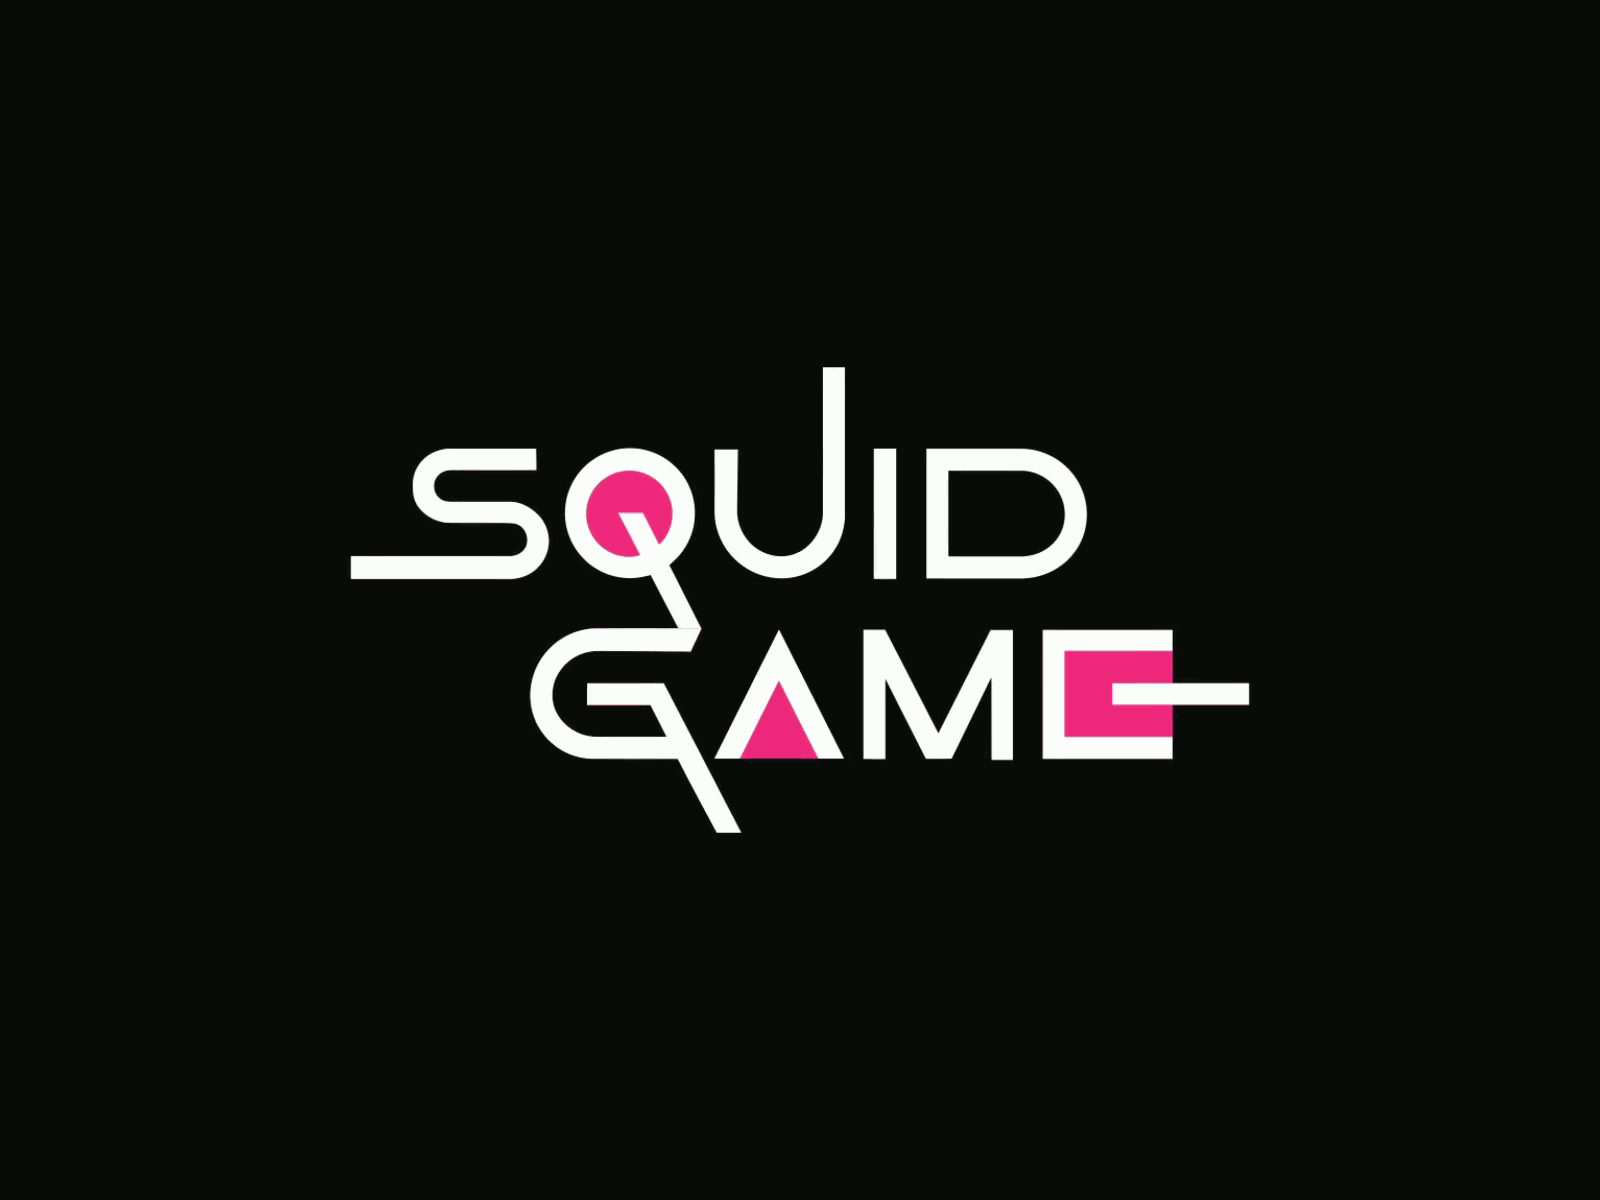 Squid Game Logo Animation 2d animation after effects animated logo animation design fear game horror intro logo logo animation motion motion logo motion title netflix squid squid game stroke title animation tutorial